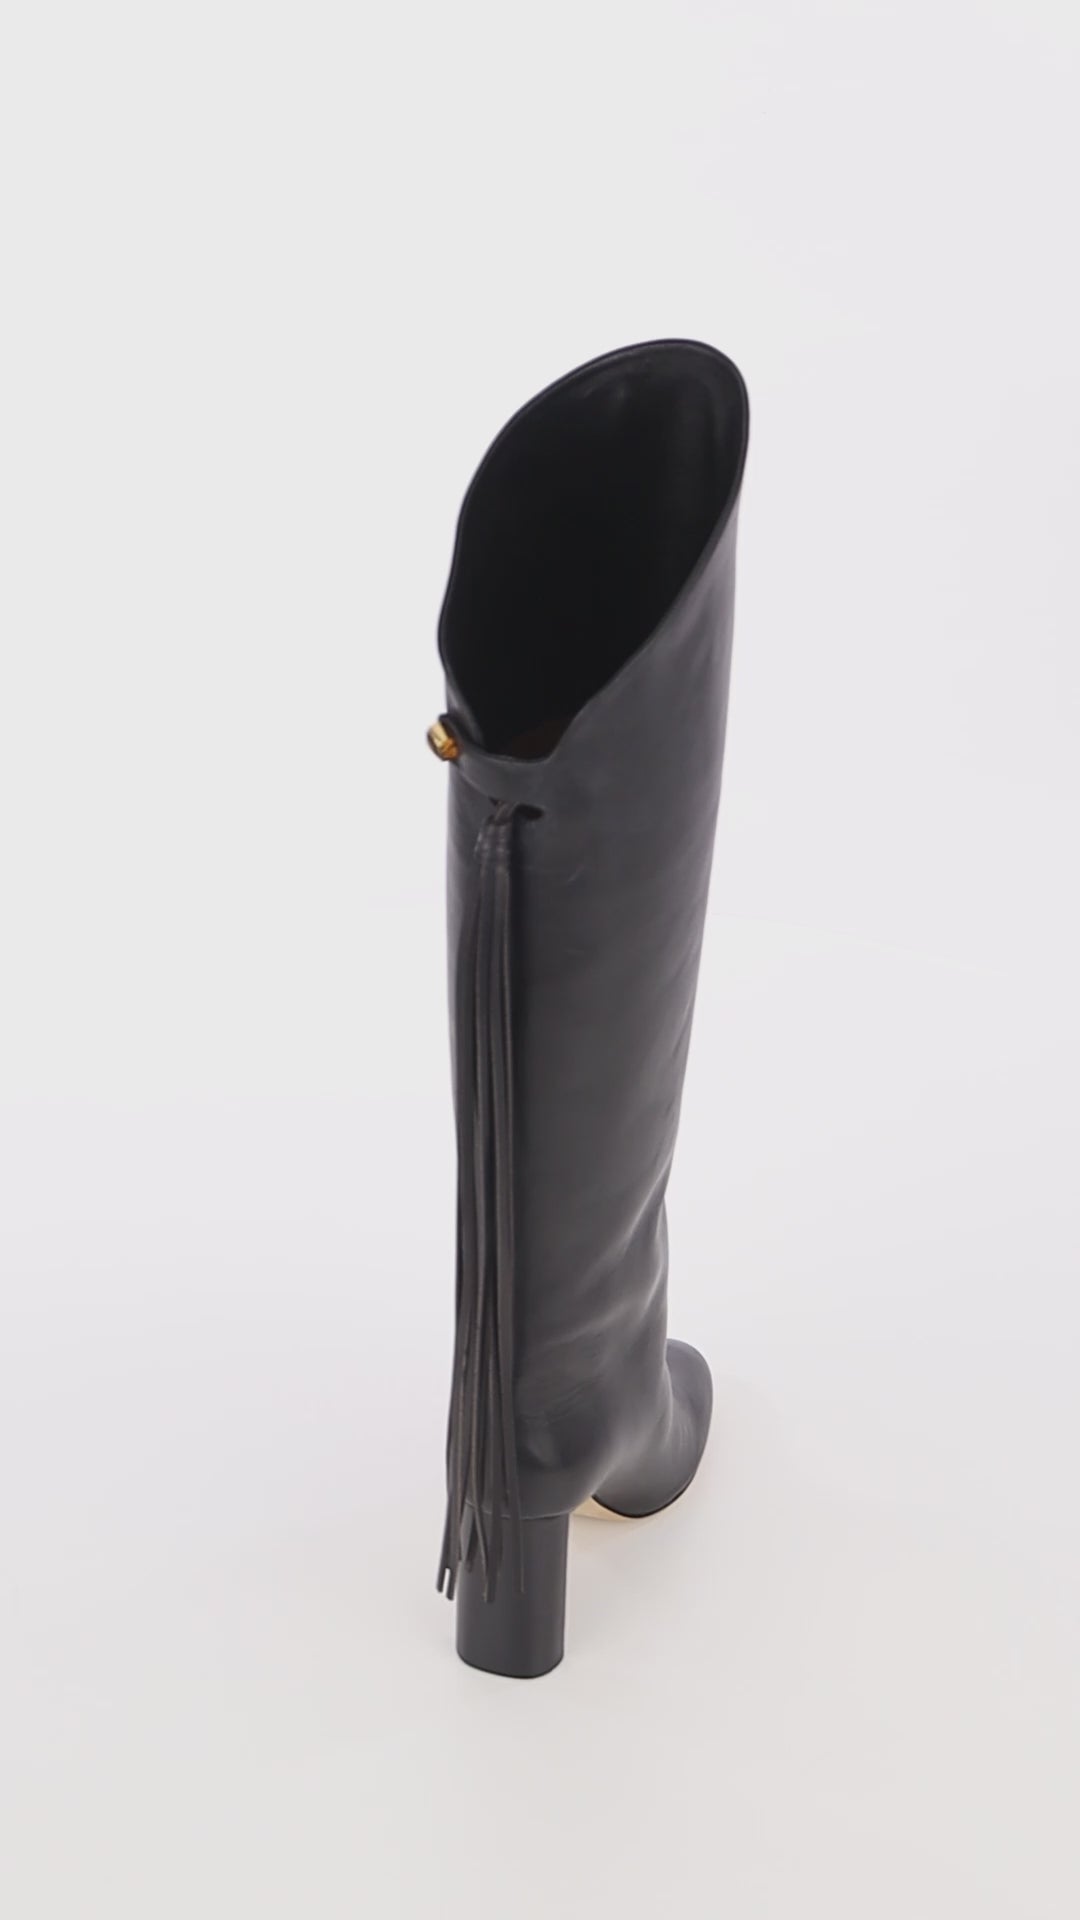 luxury equestrian black leather high boots made in Italy skorpios